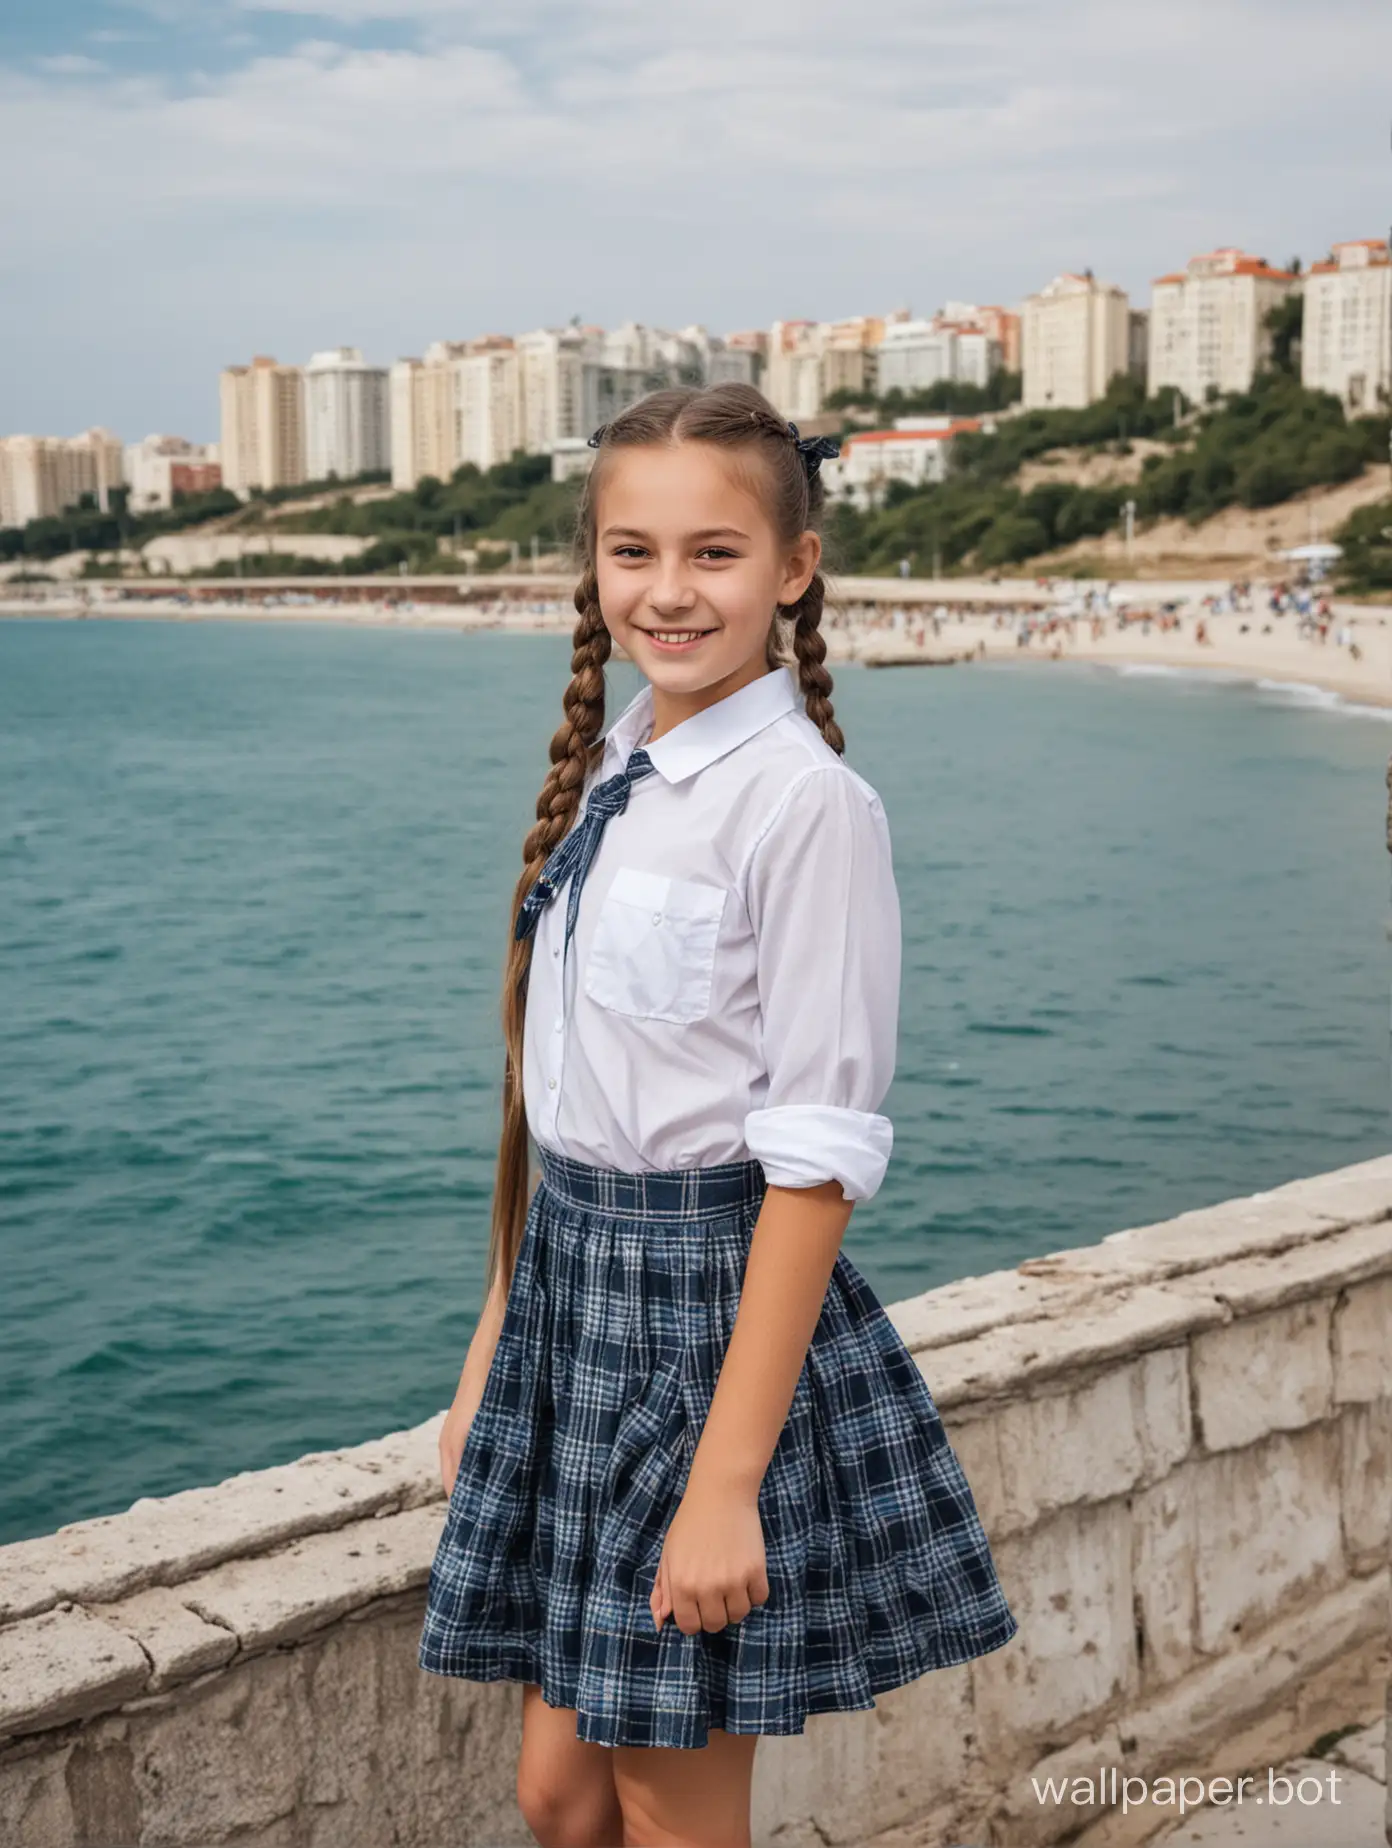 Beautiful Soviet schoolgirl 11 years old with ponytails in Crimea against the background of the sea, in full height, dynamic poses, smile, people and buildings in the background